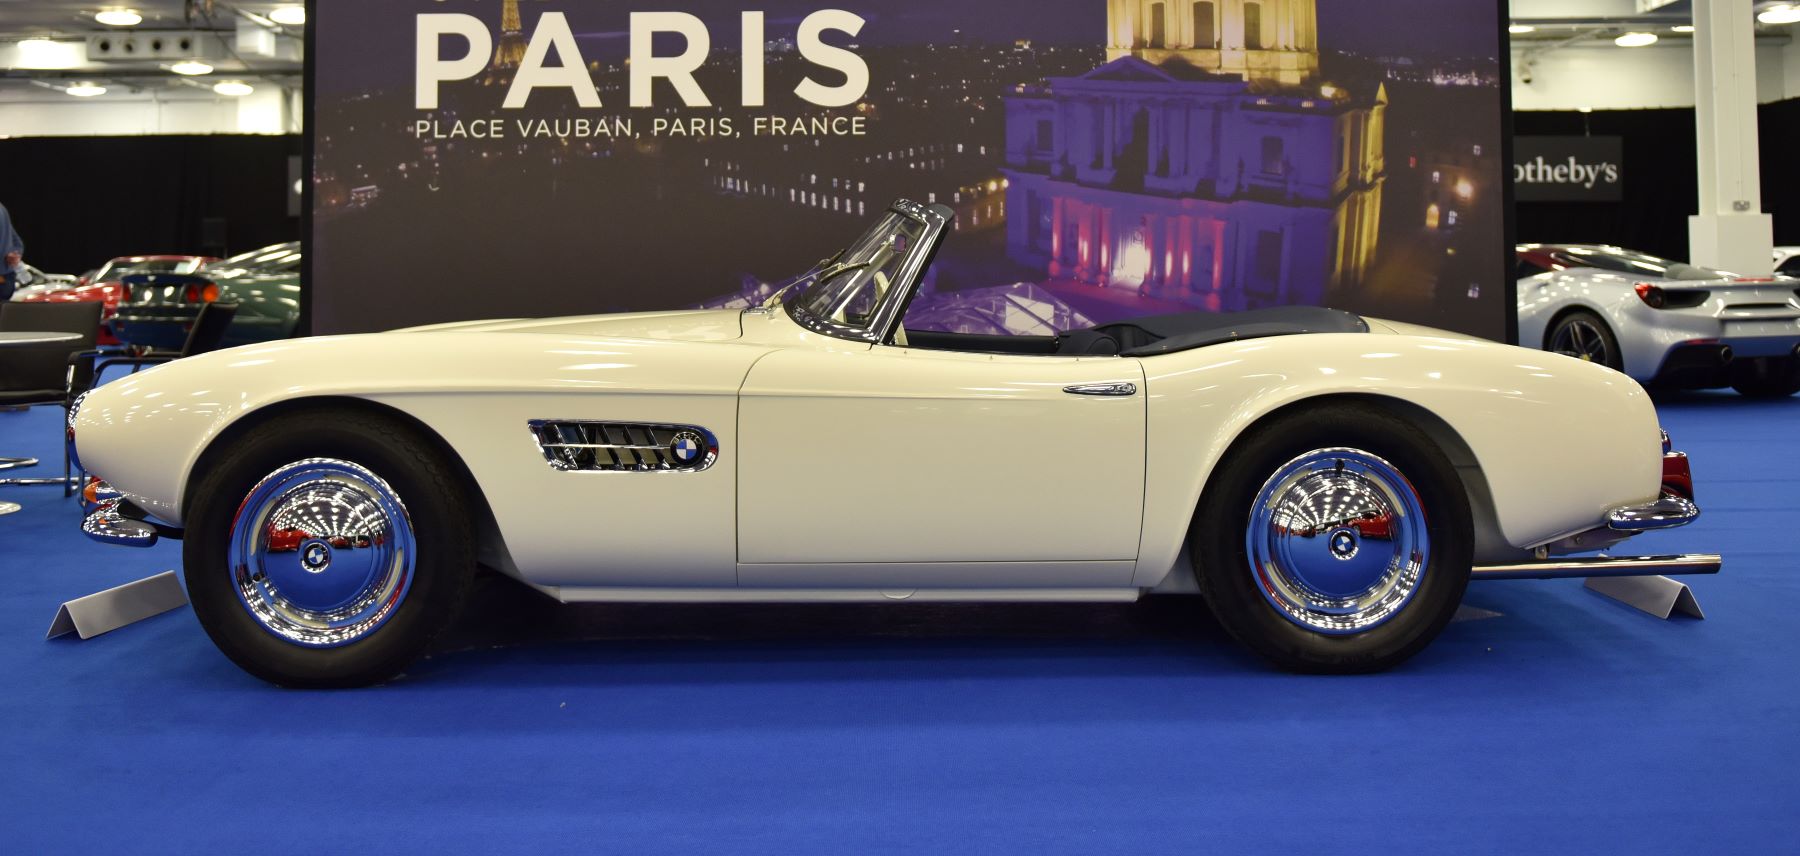 A BMW 507 Roadster convertible model on display during an RM Sotheby's car collectors event at the Olympia London